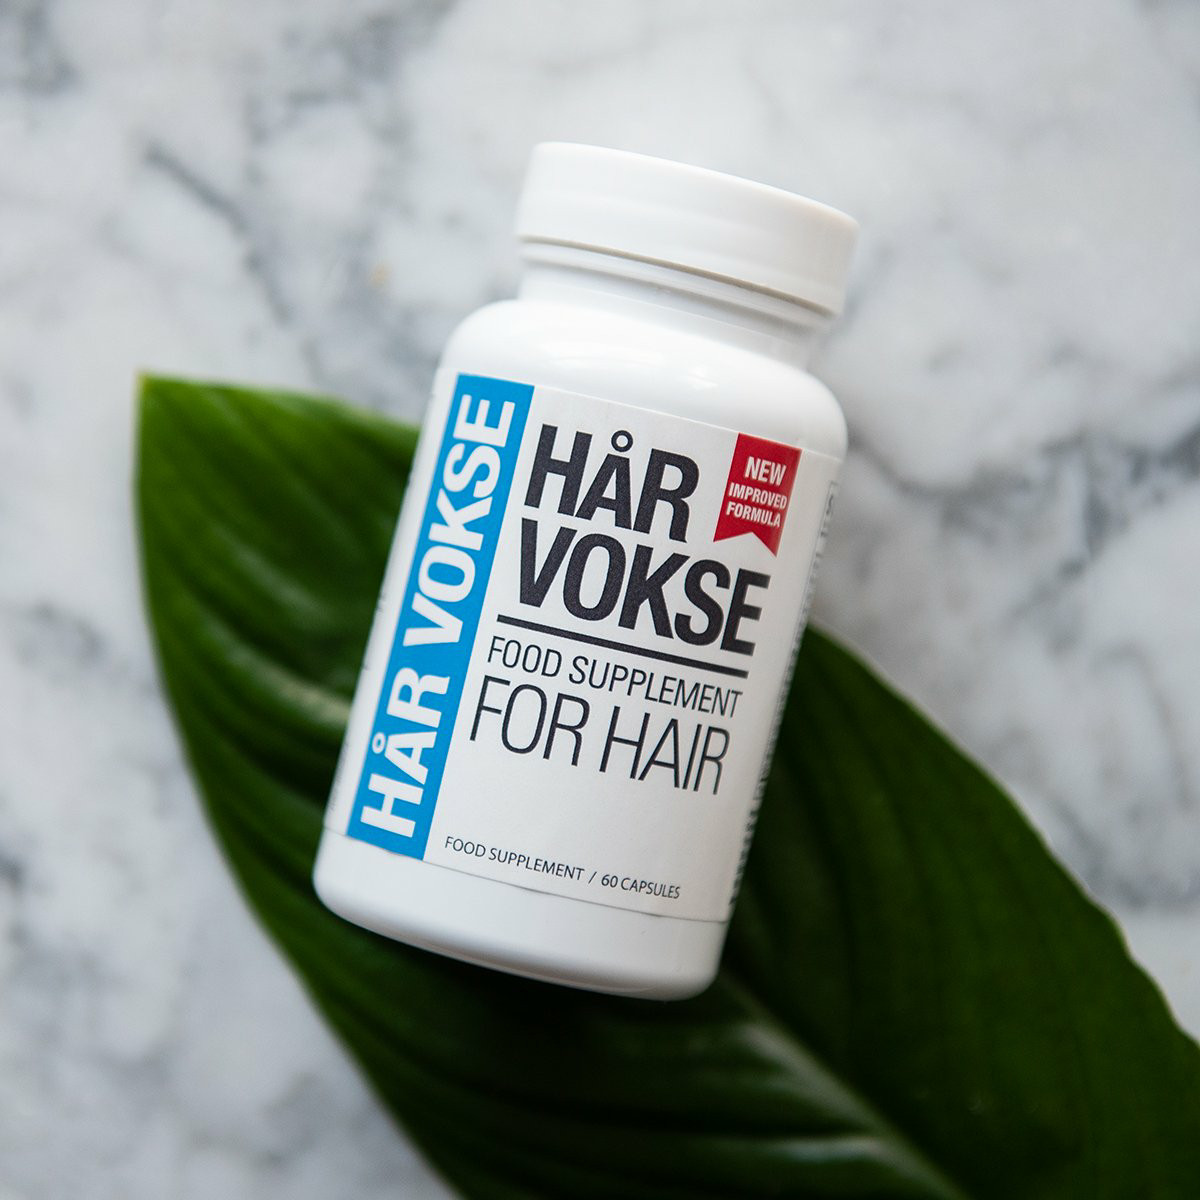 Regrowing your hair can seem impossible, but there are products out there that actually bring your luscious locks back! Check out our HarVokse hair review.